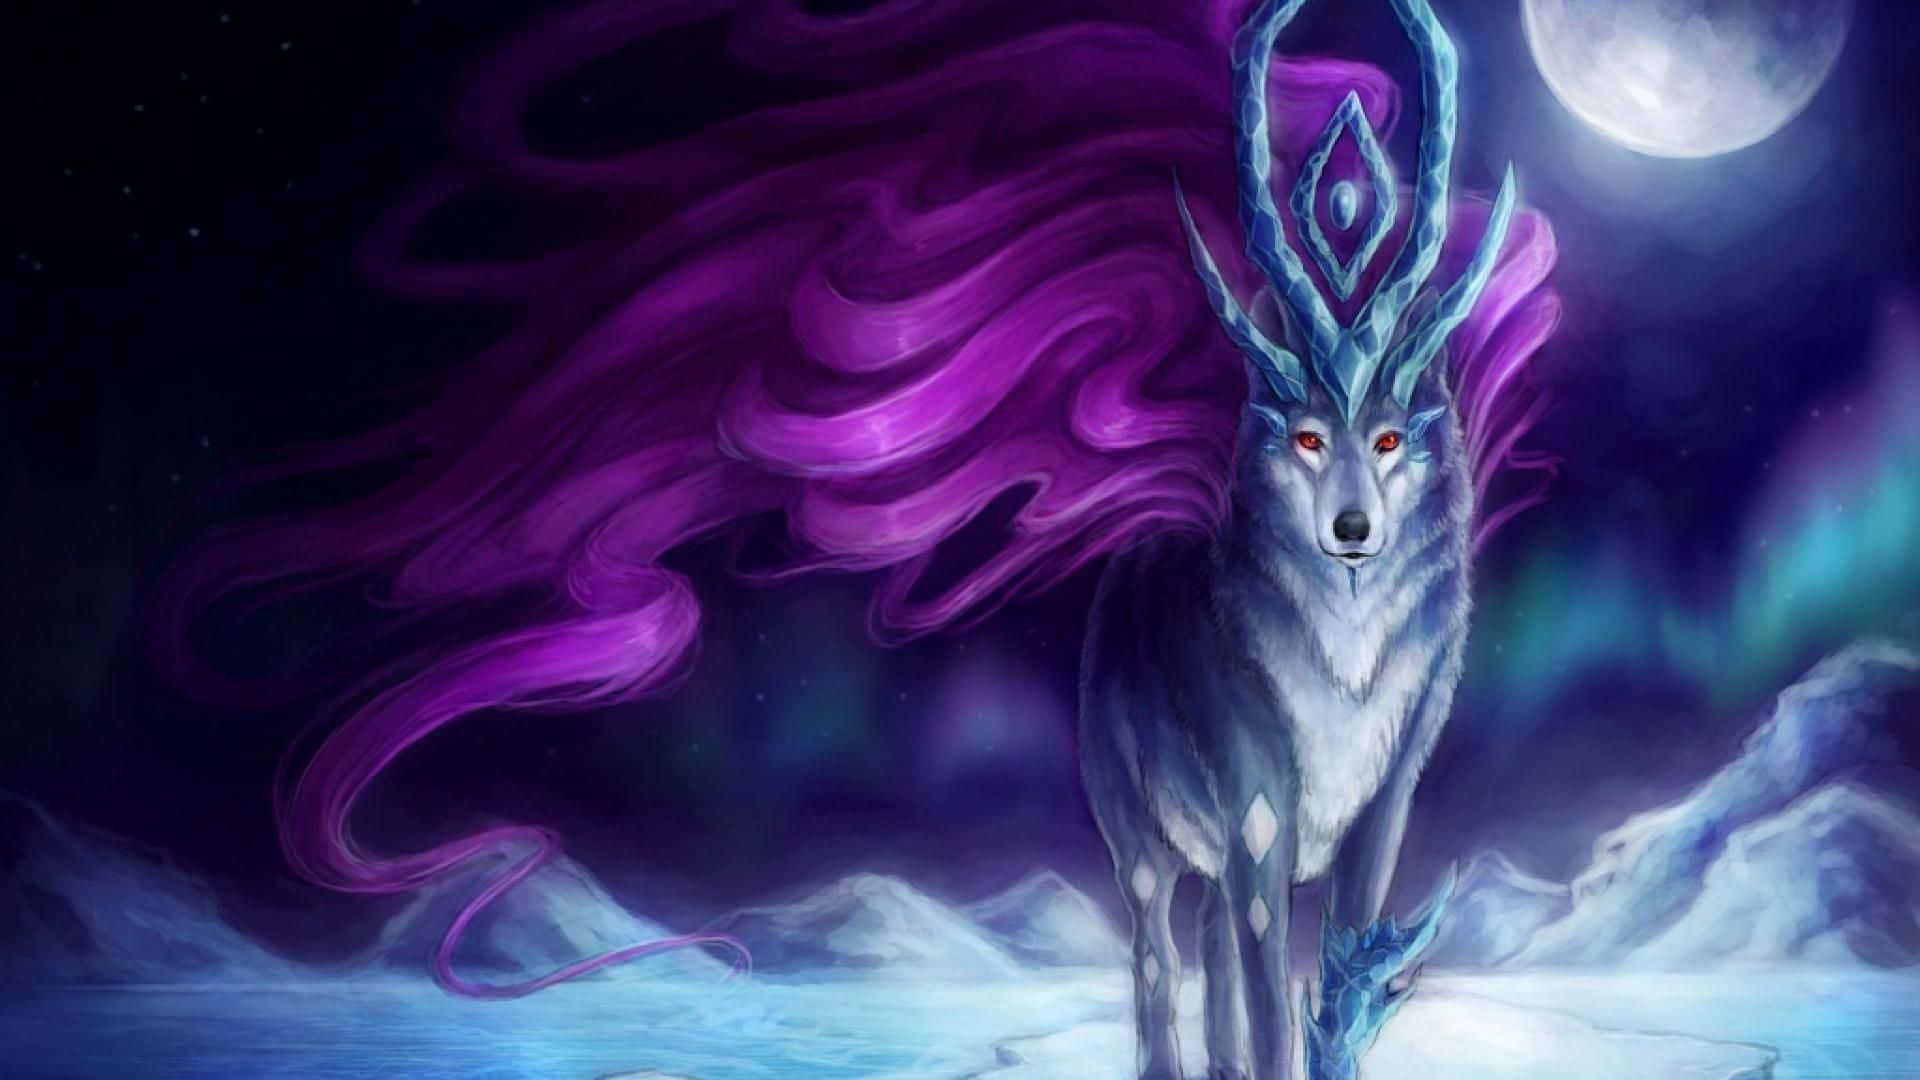 Howling into the Night Wallpaper